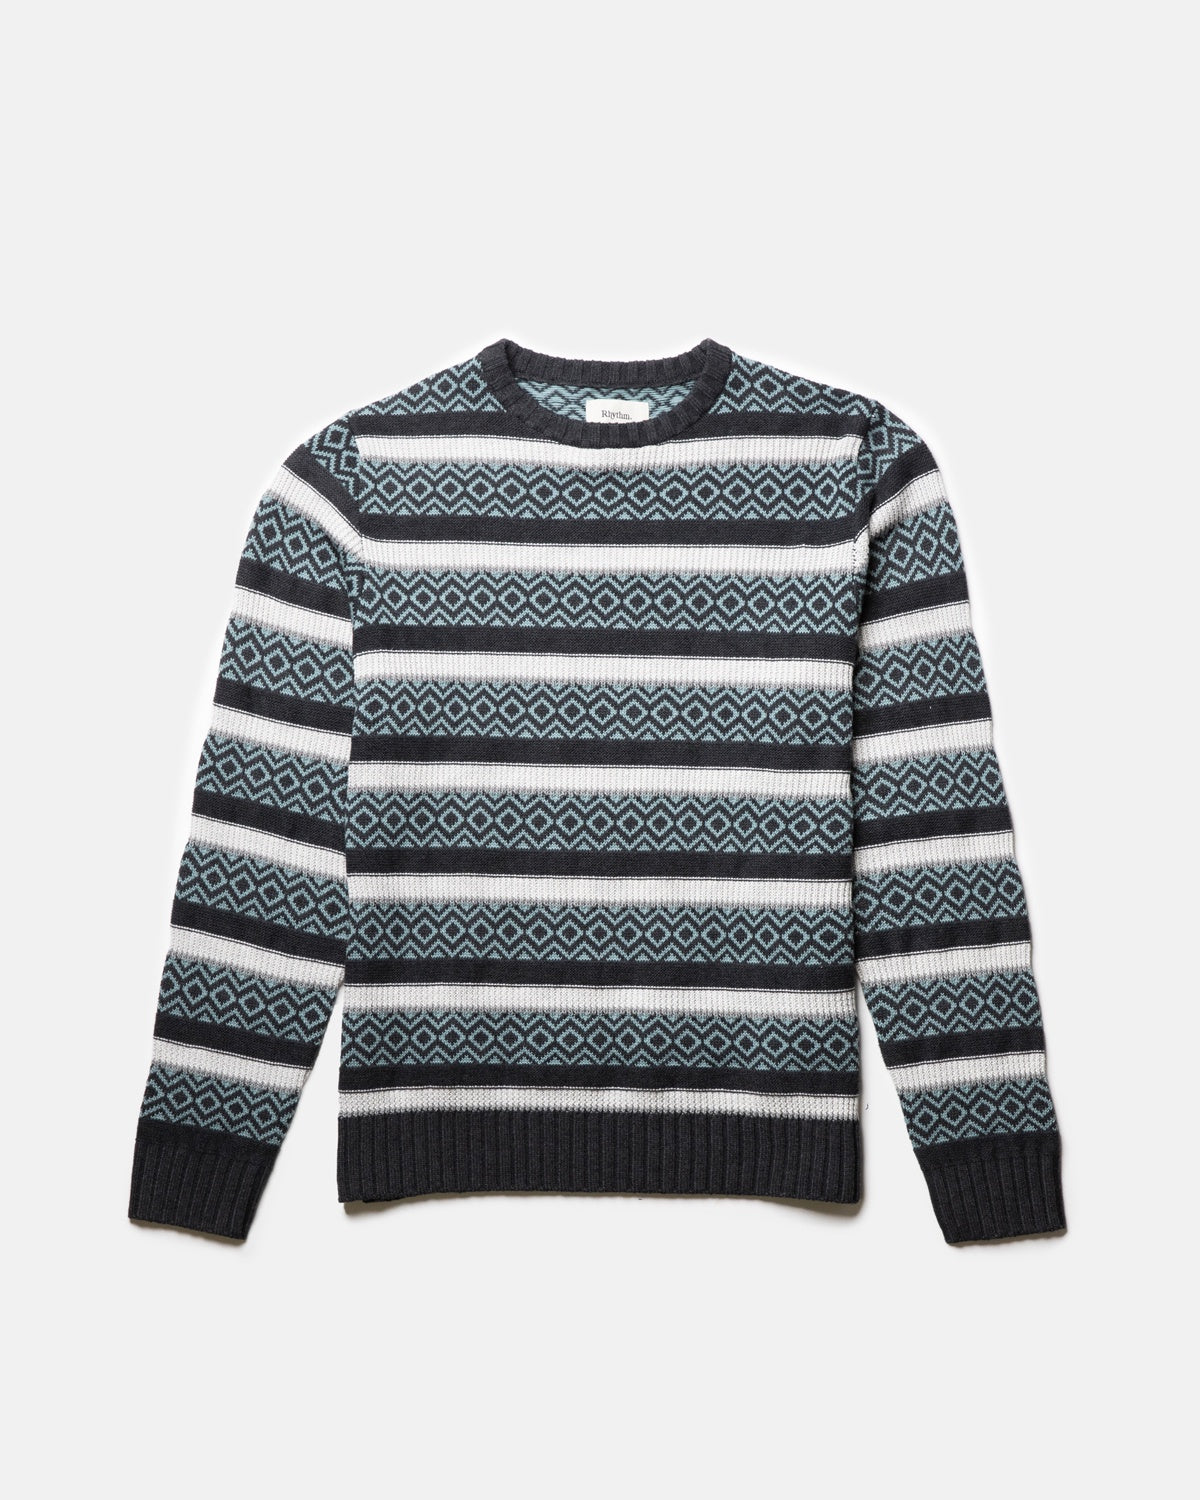 Pacific Knit